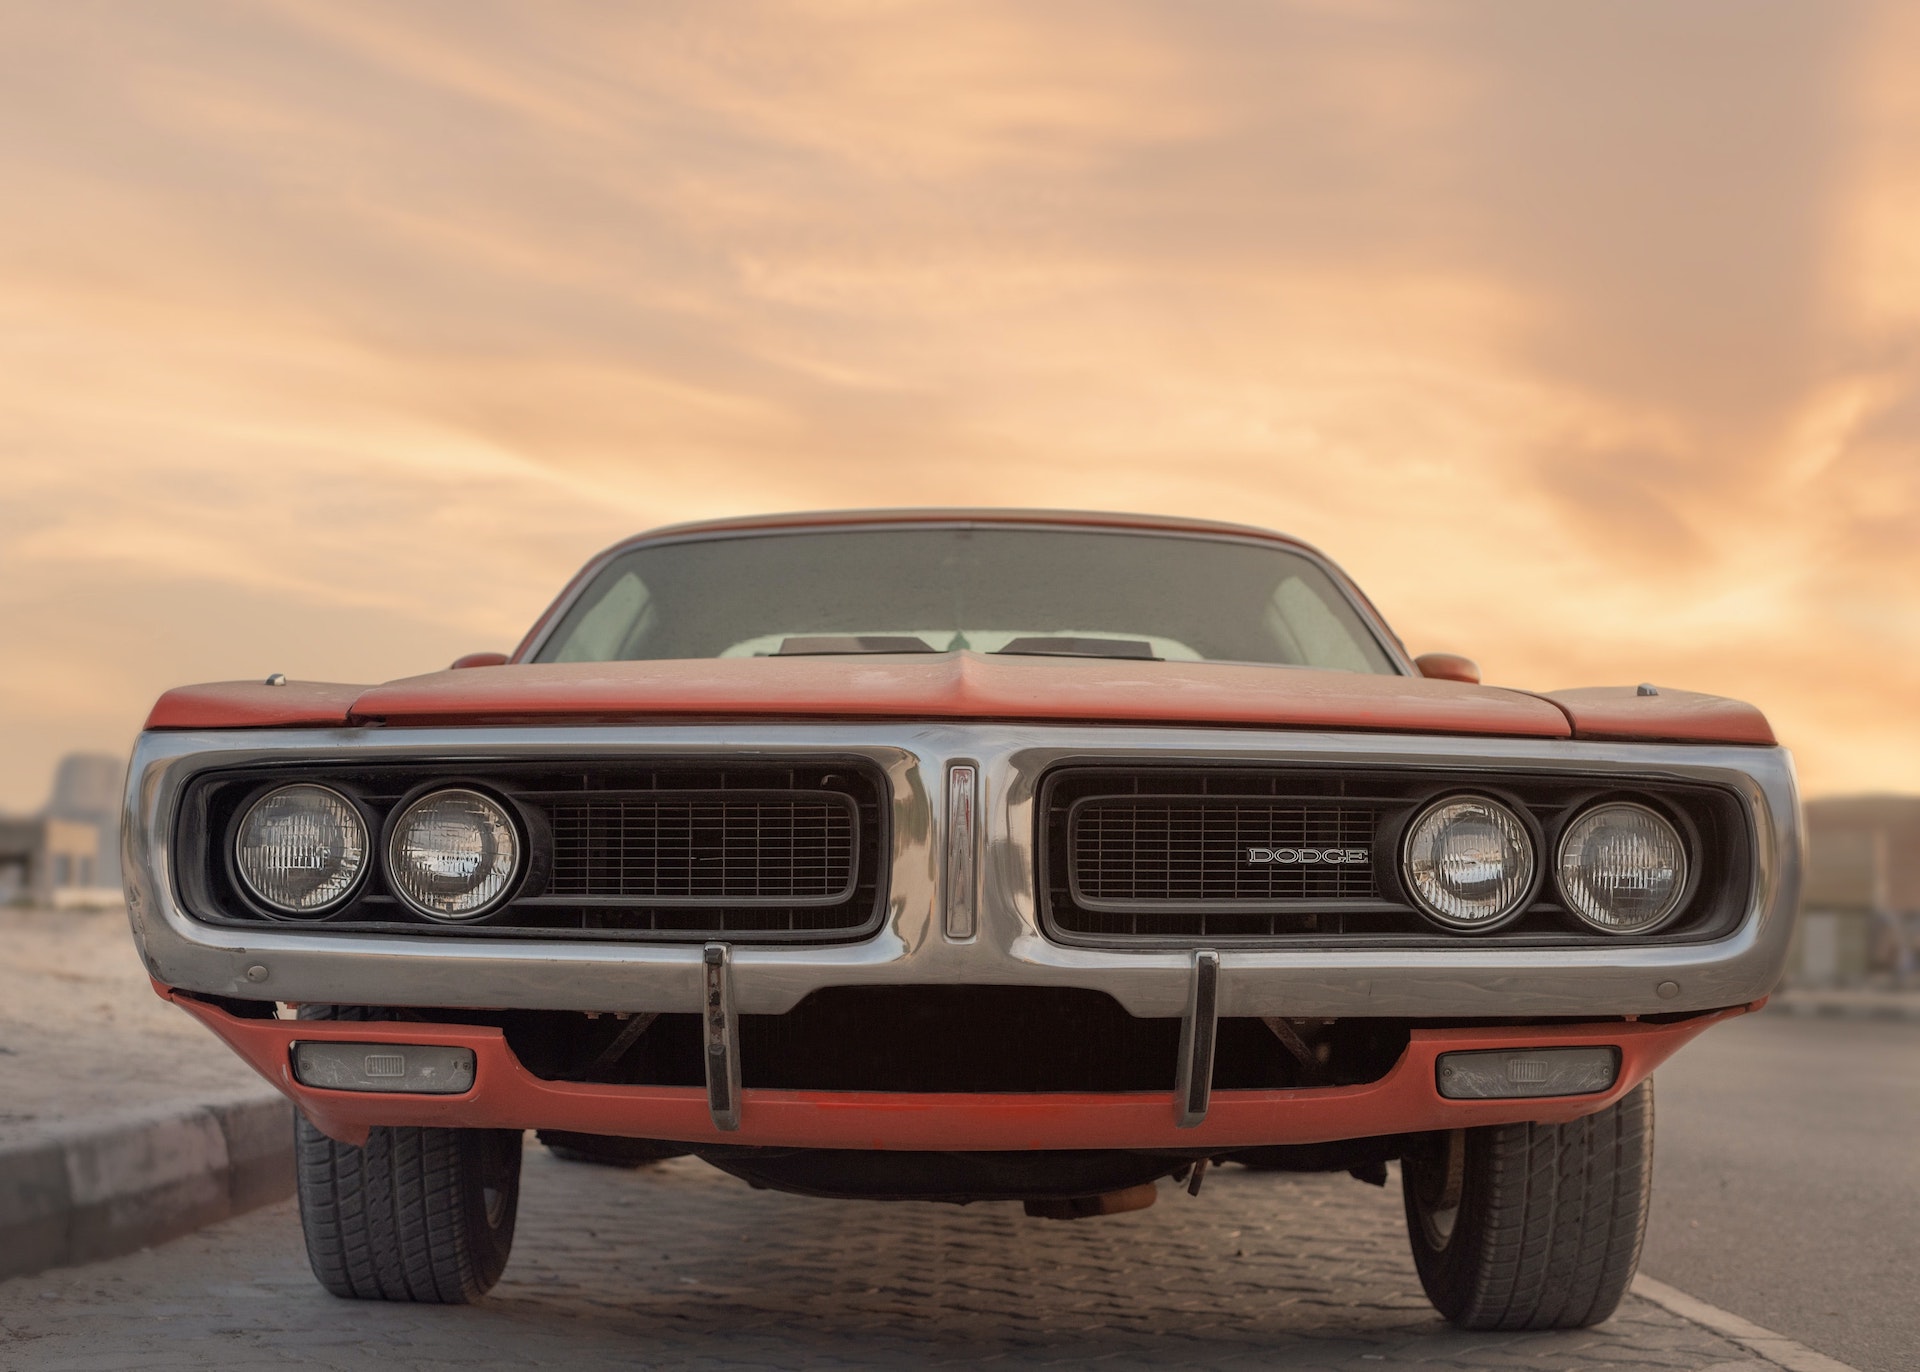 Tips for Owning a Classic Muscle Car